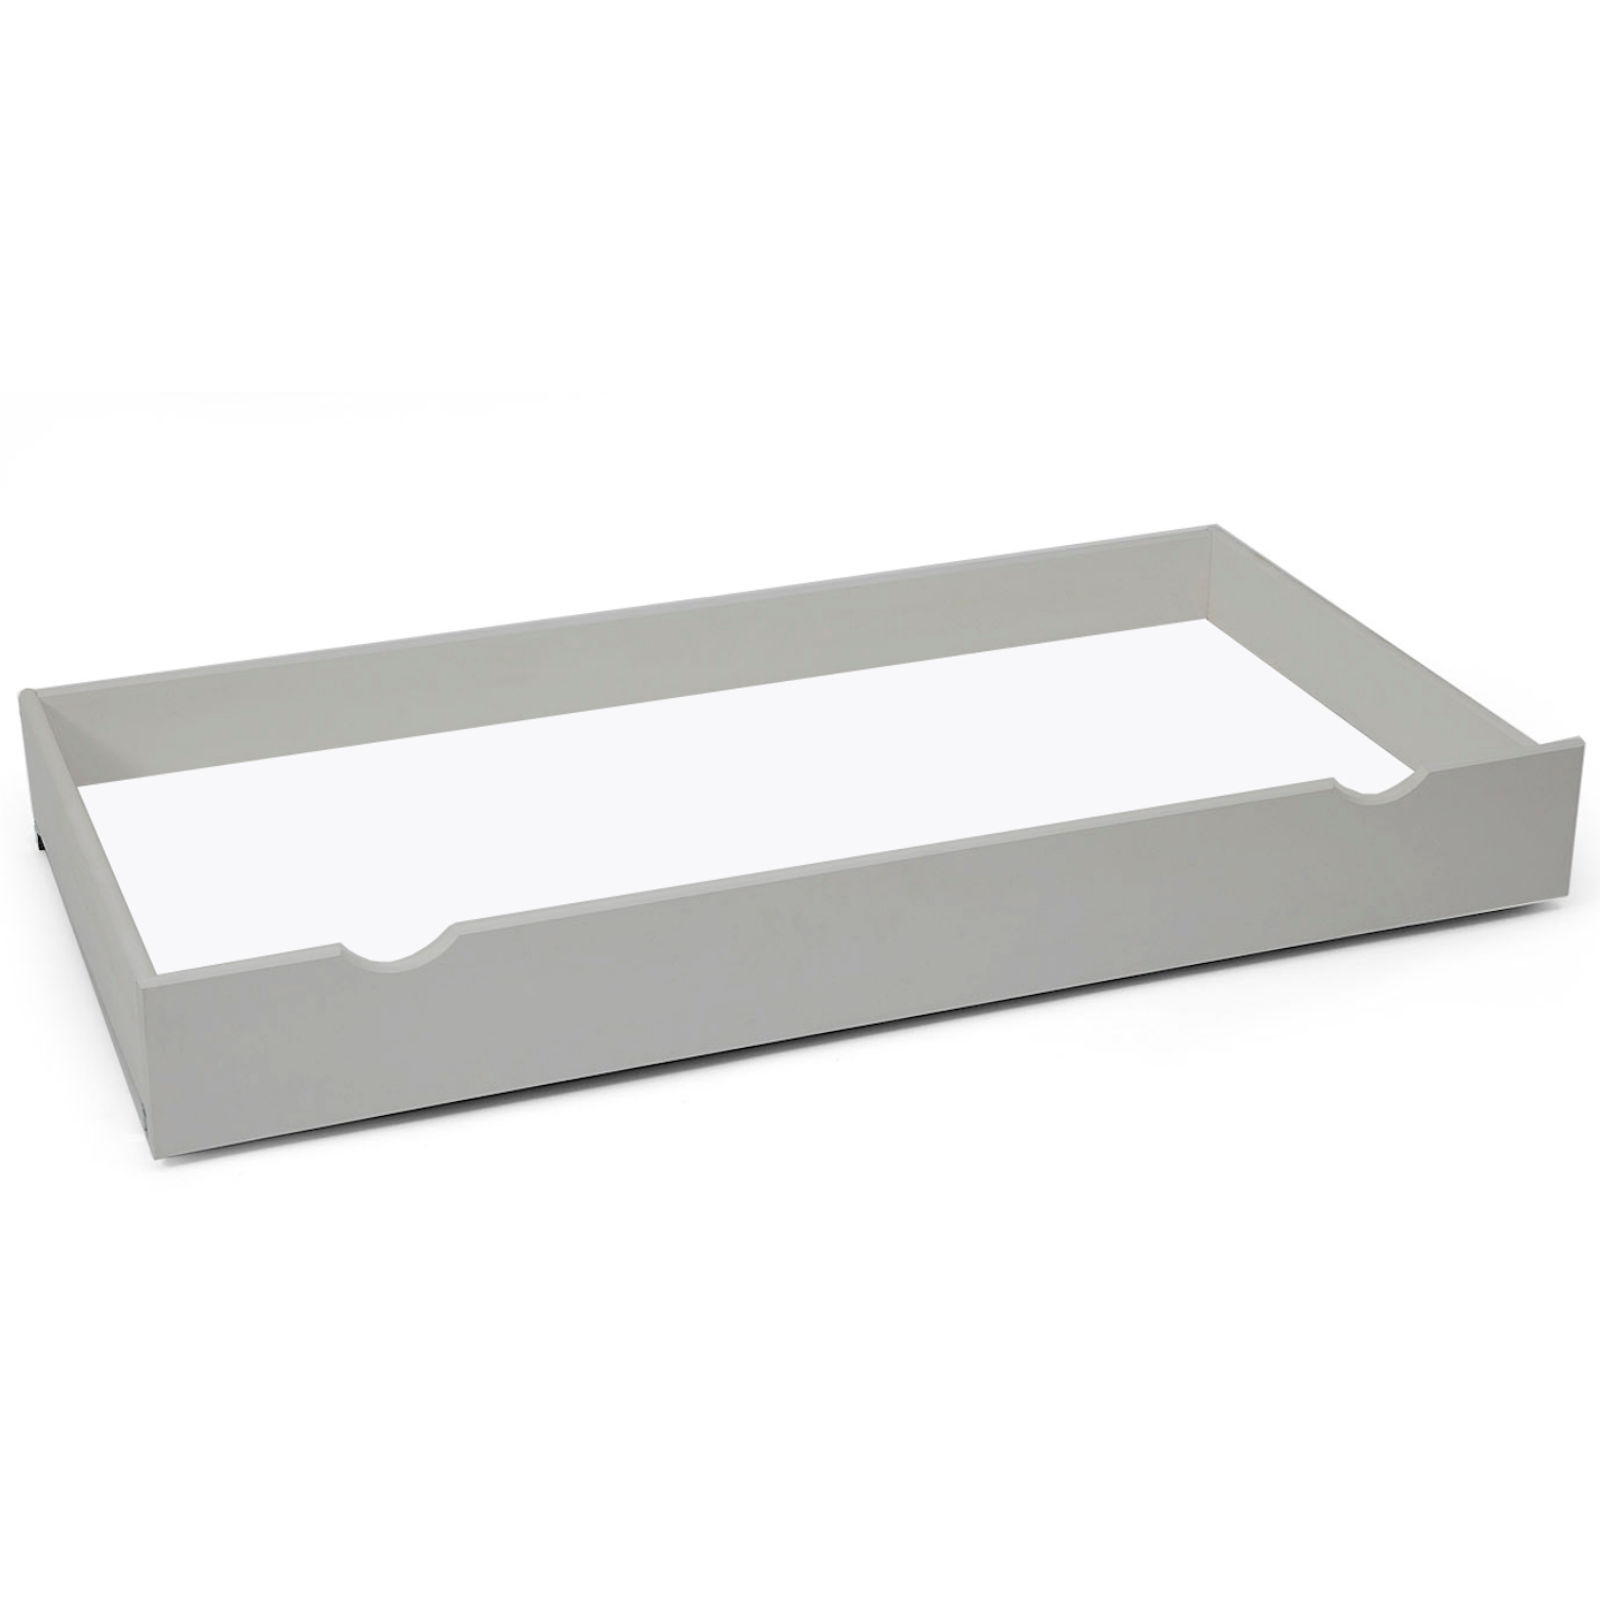 4baby Large Under Bed Rollaway Drawer - Grey